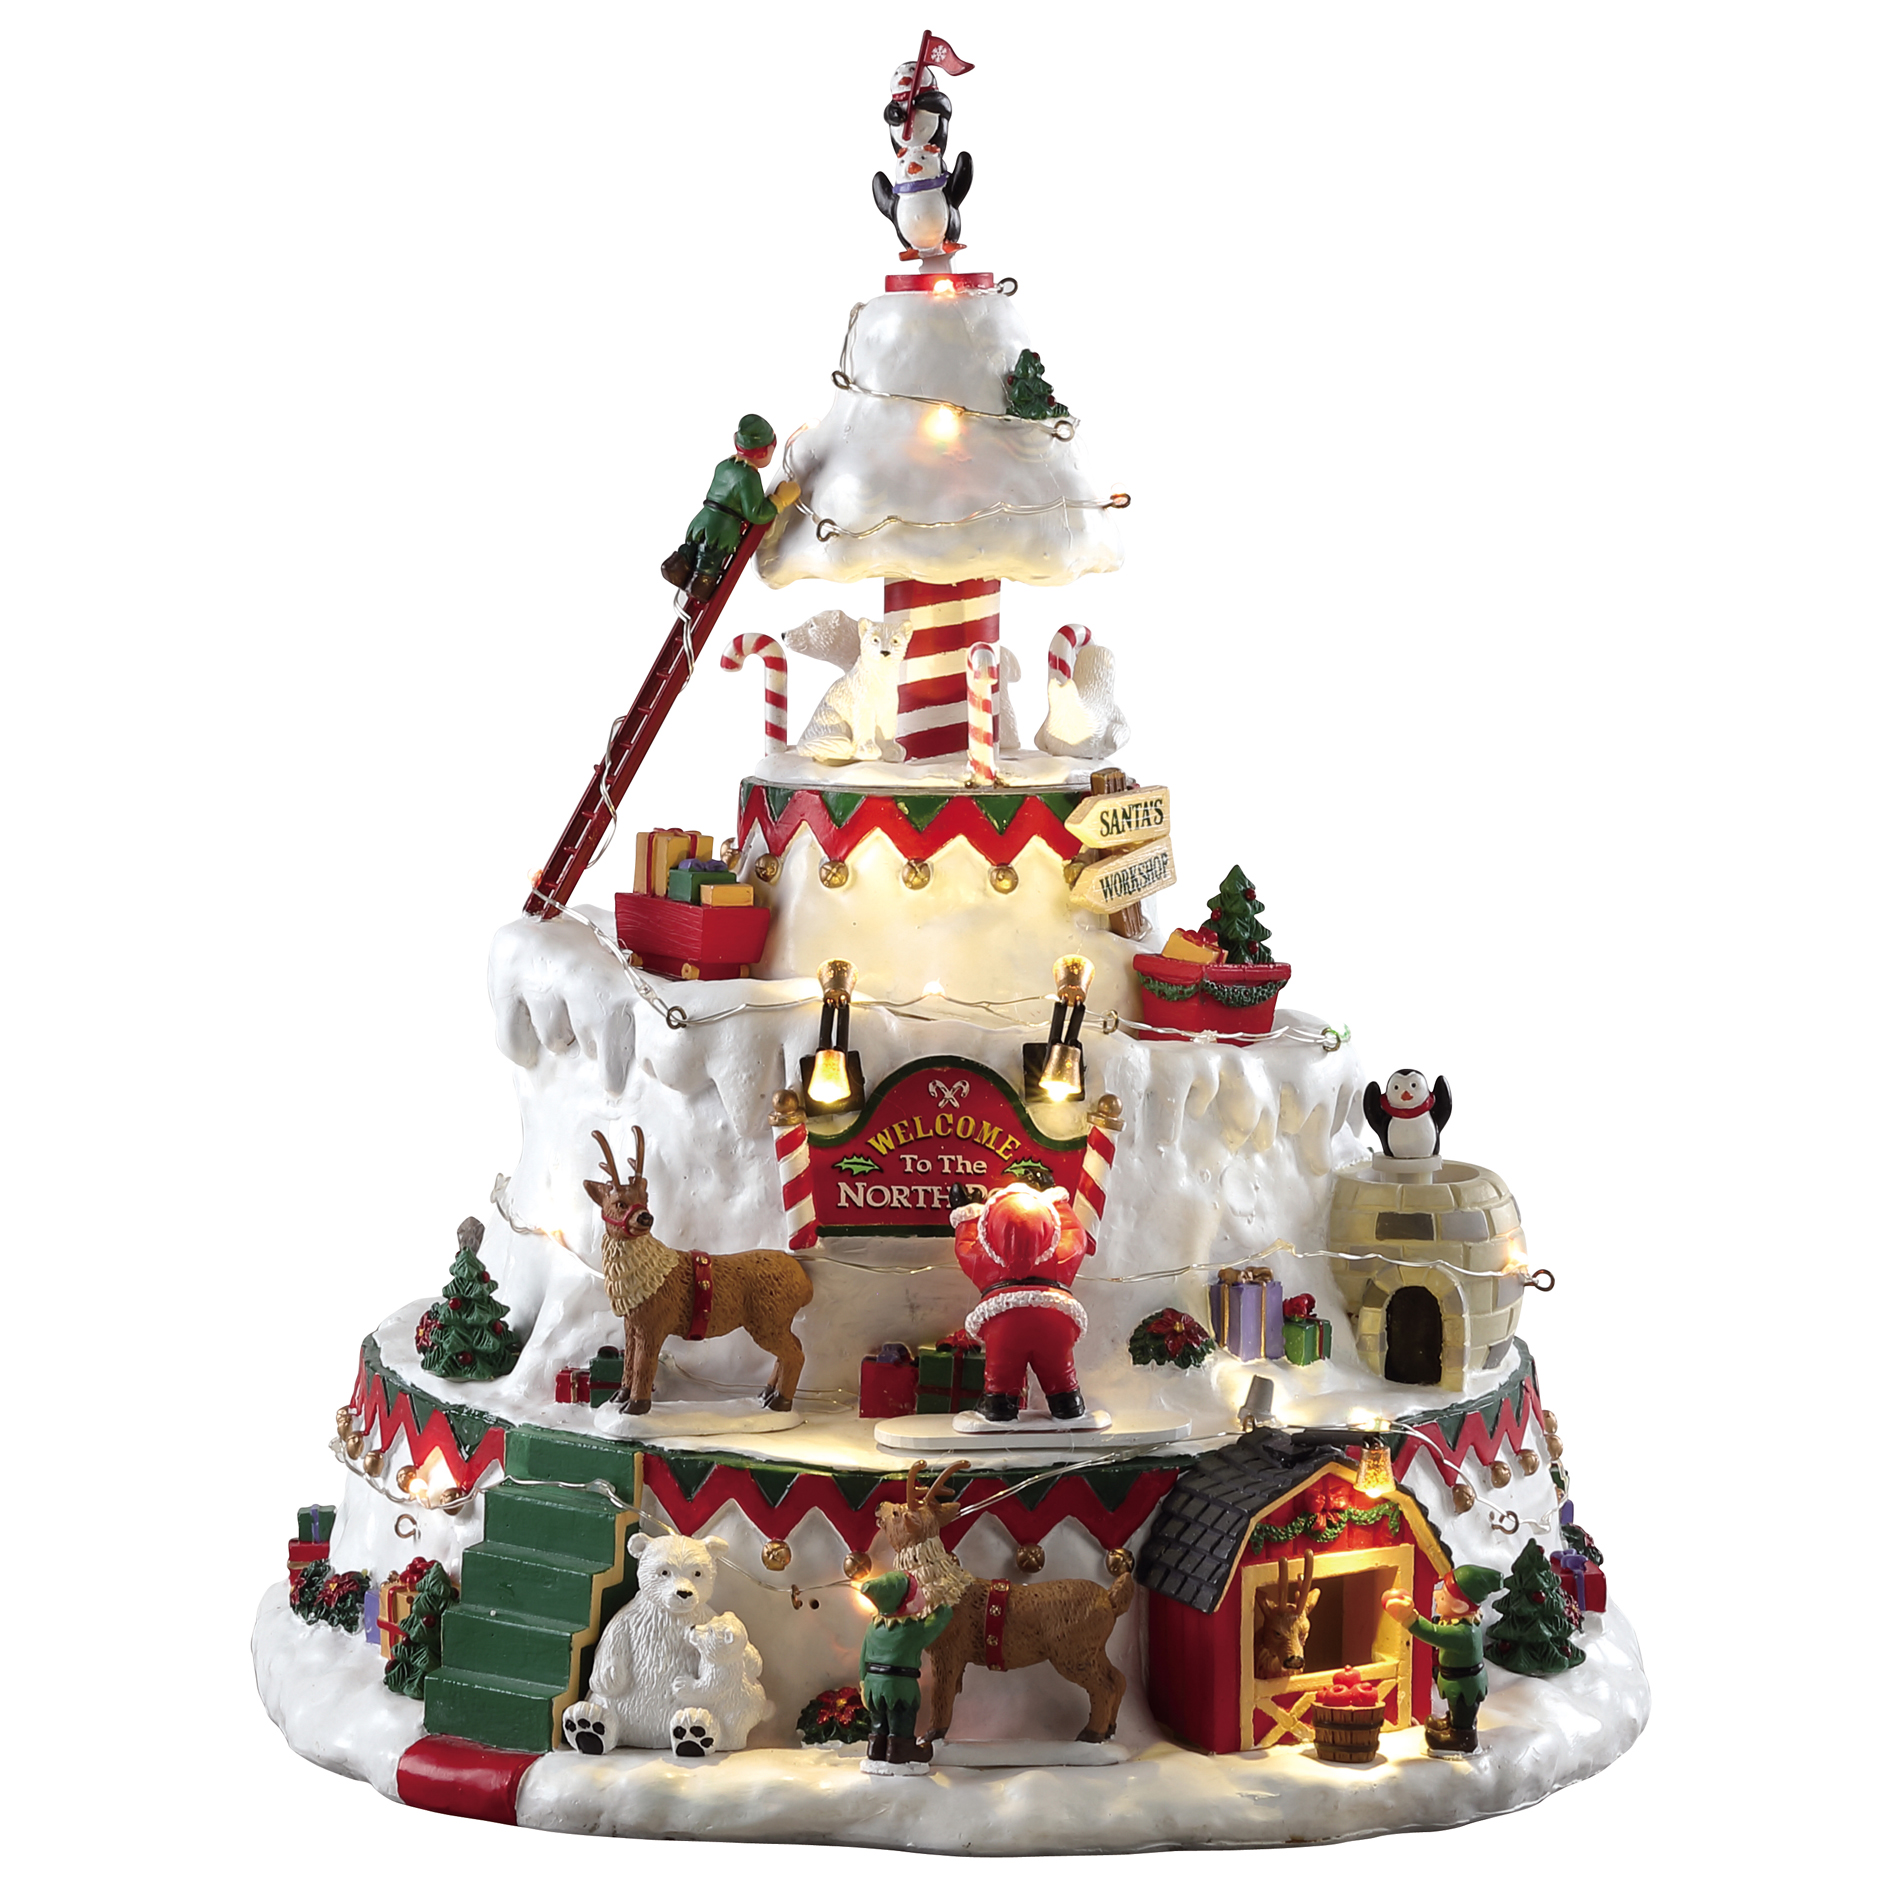 Lemax North Pole Tower Christmas Village Collectible